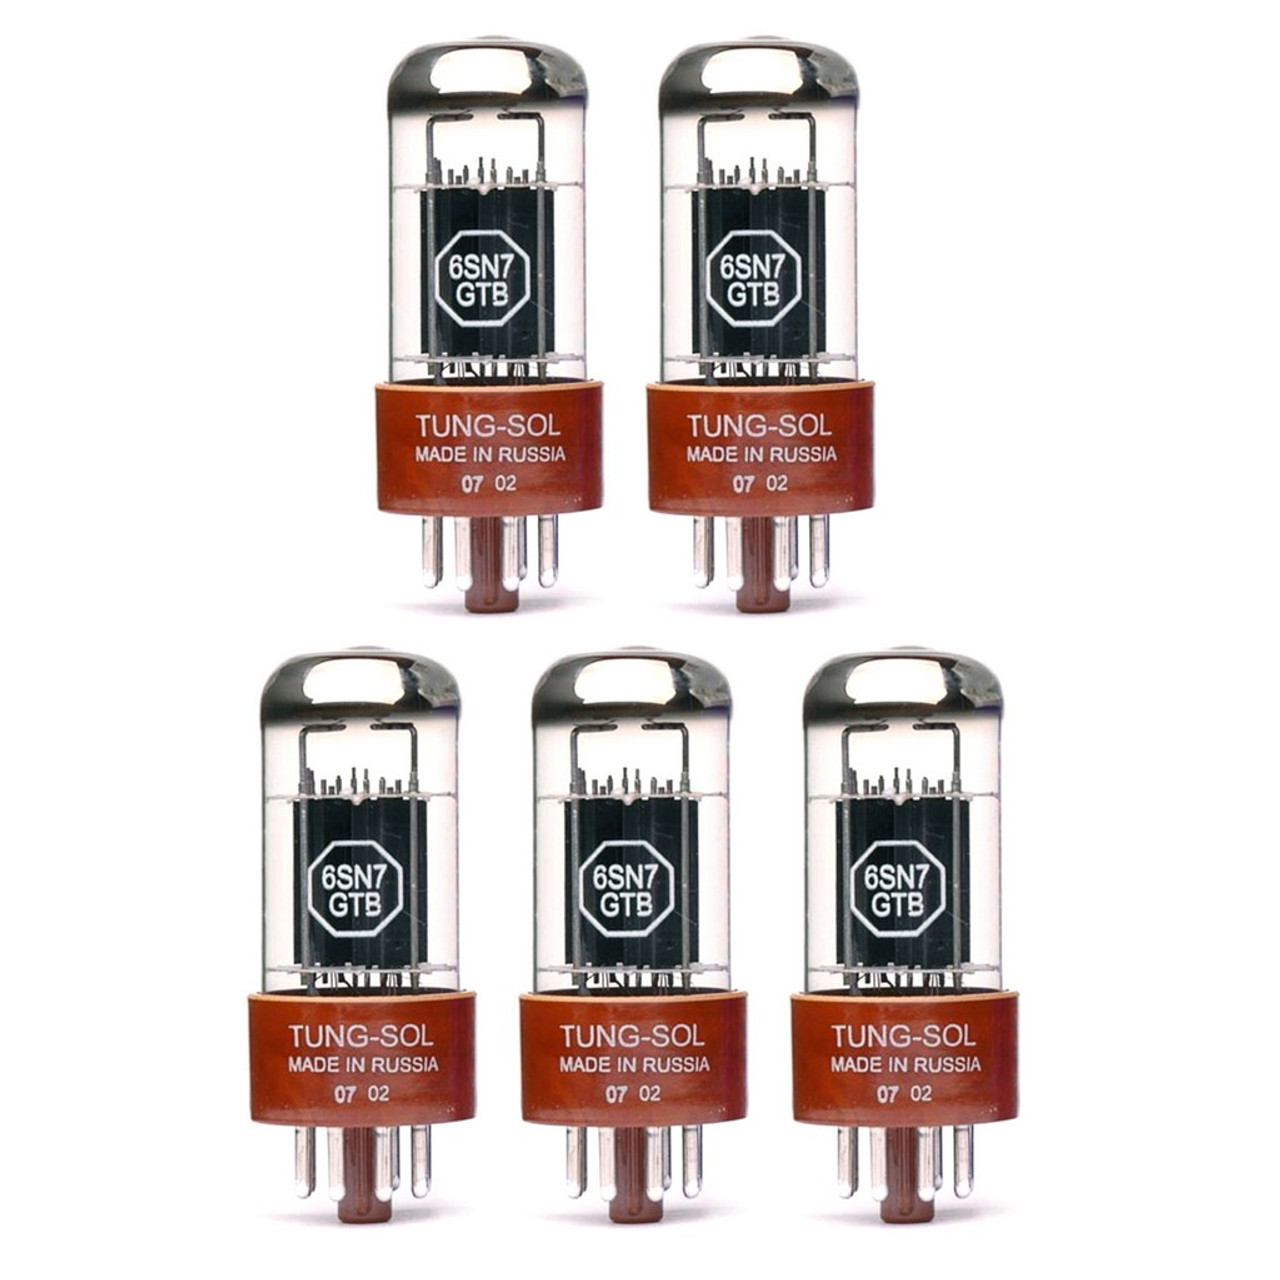 New Gain Matched Trio Tung-Sol Reissue 6SN7GTB Vacuum Tubes 6SN7 6SN7GT 3 